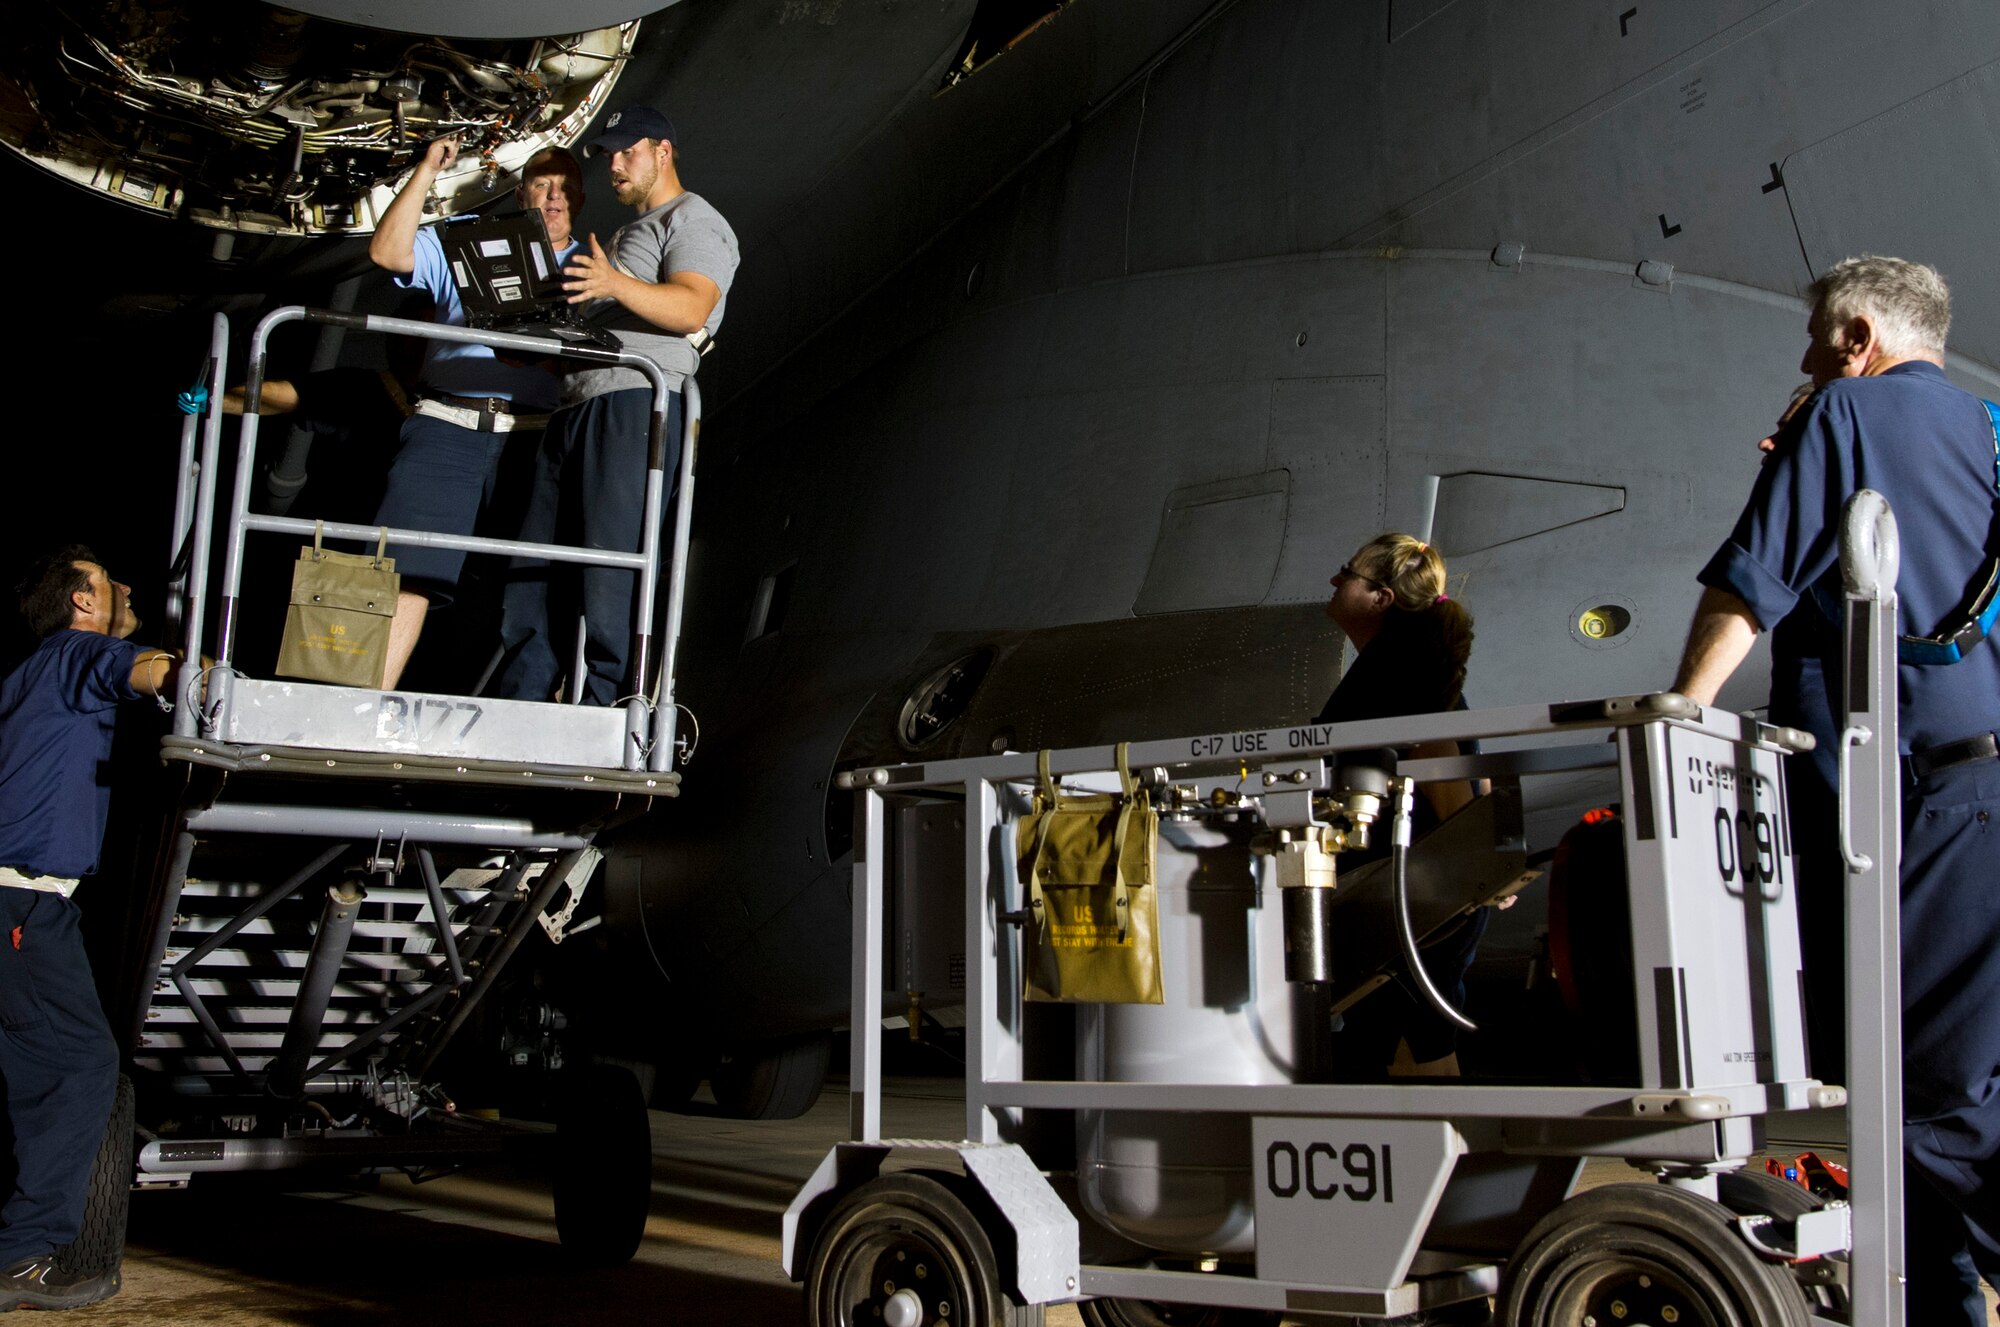 ALTUS AIR FORCE BASE, Okla. – Members of the 97th Maintenance Directorate, work to replace an Integrated Drive Generator on a U.S. Air Force C-17 Globemaster III during the night shift on the flightline, June 26. The 97th MX is one of the many squadrons that continues to work 24 hours a day to keep the mission at Altus AFB thriving. (U.S. Air Force photo by Kenneth W. Norman / Released)